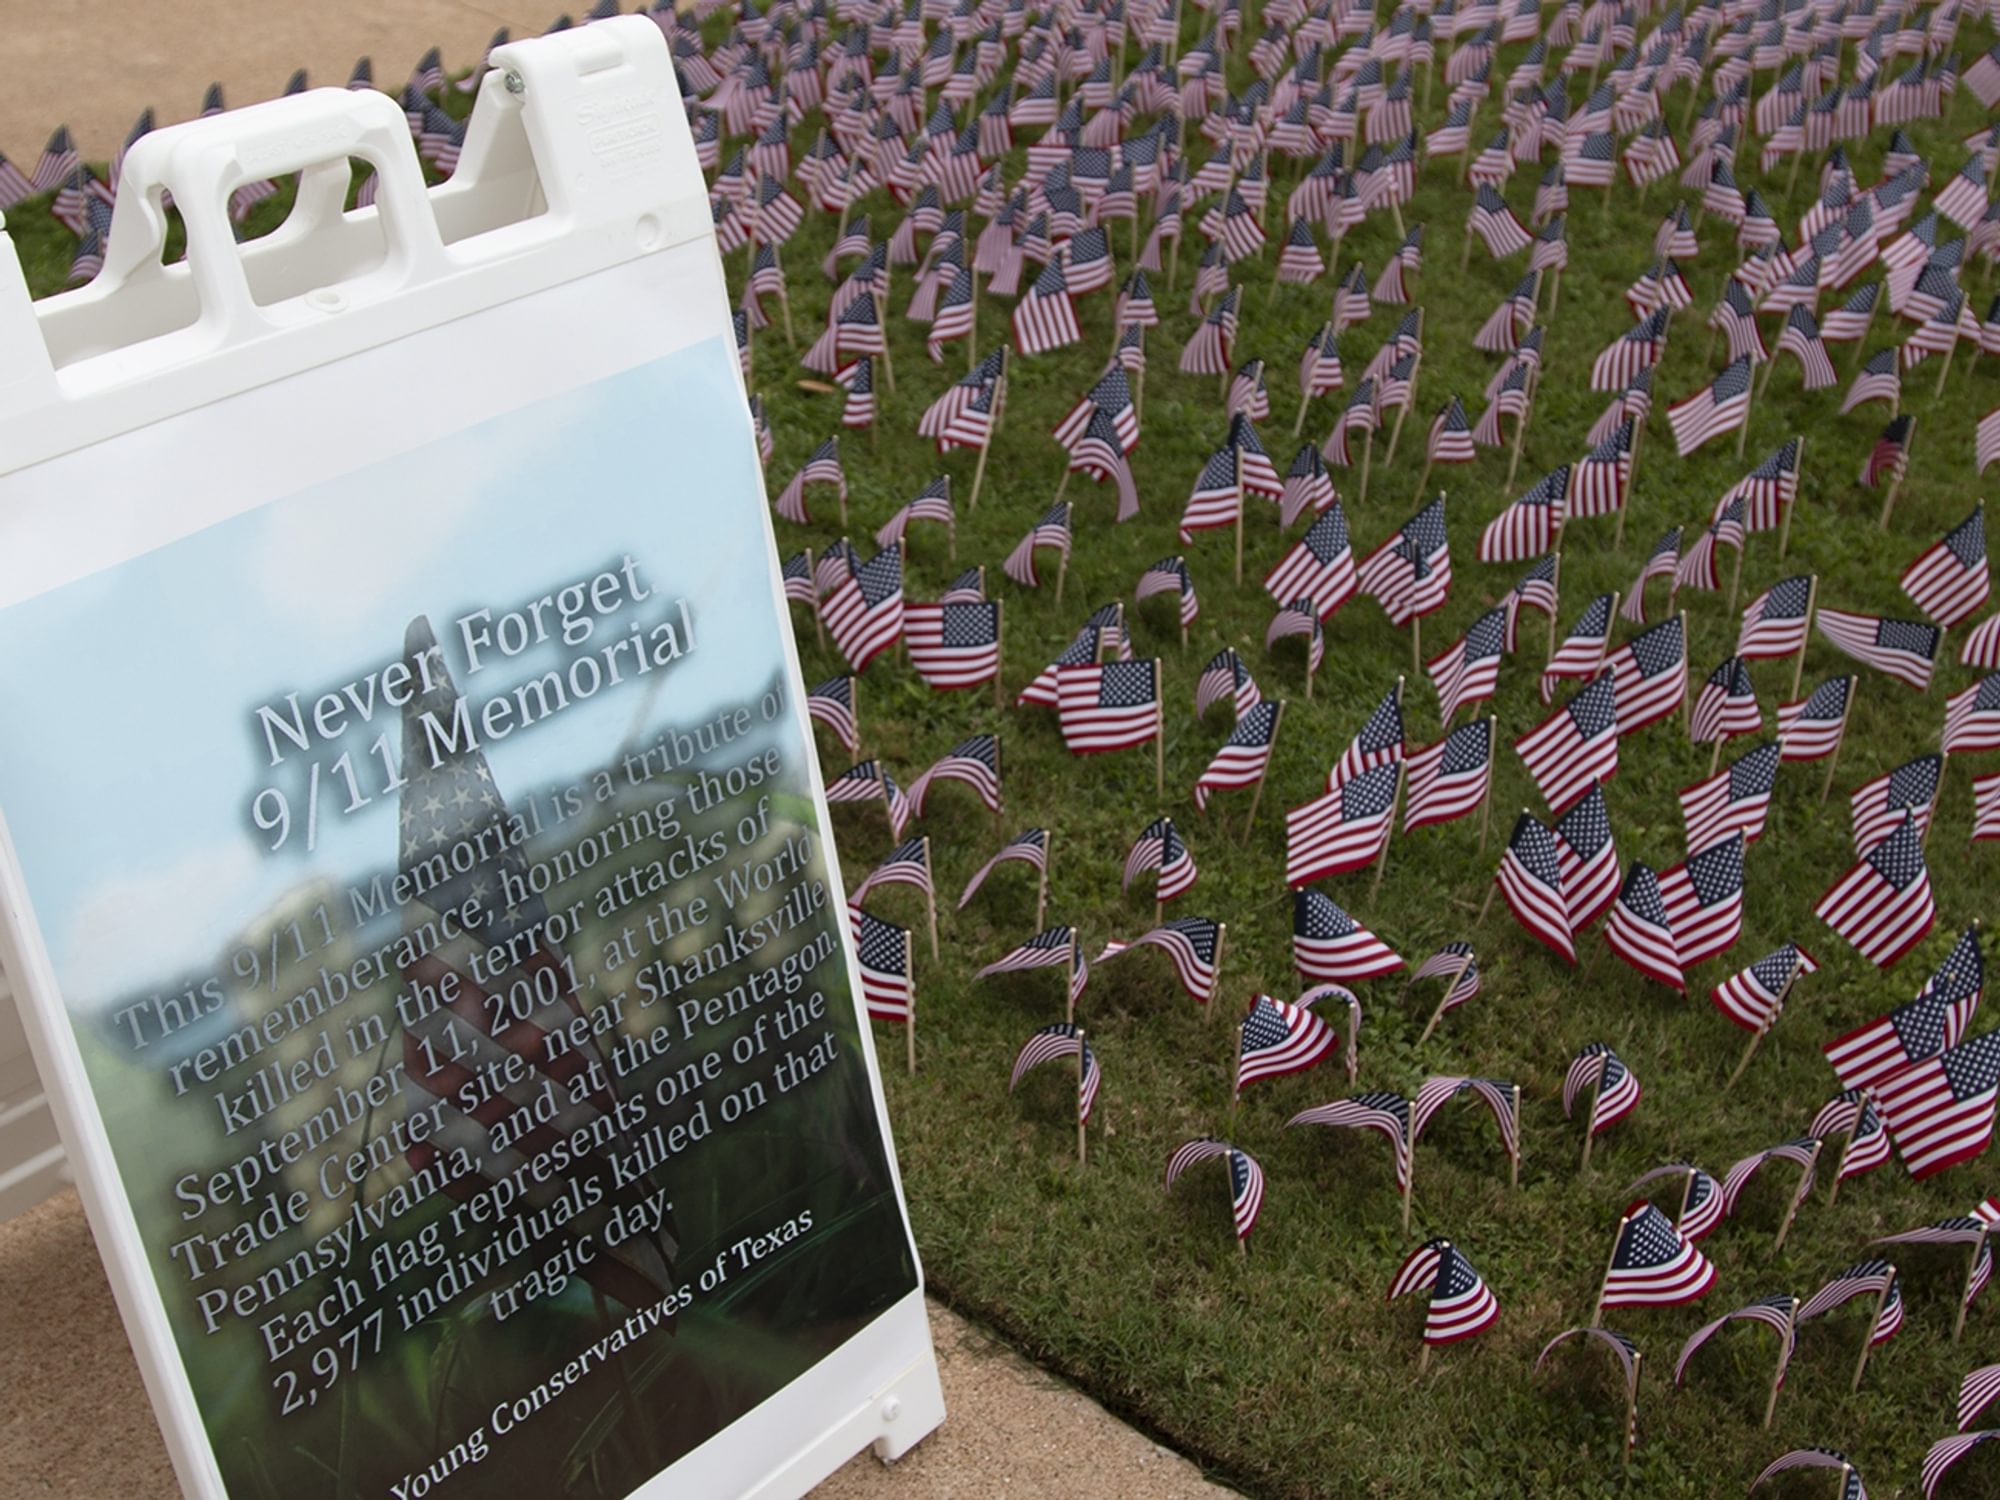 UMHB Young Conservatives of Texas's 9/11 Flag Display